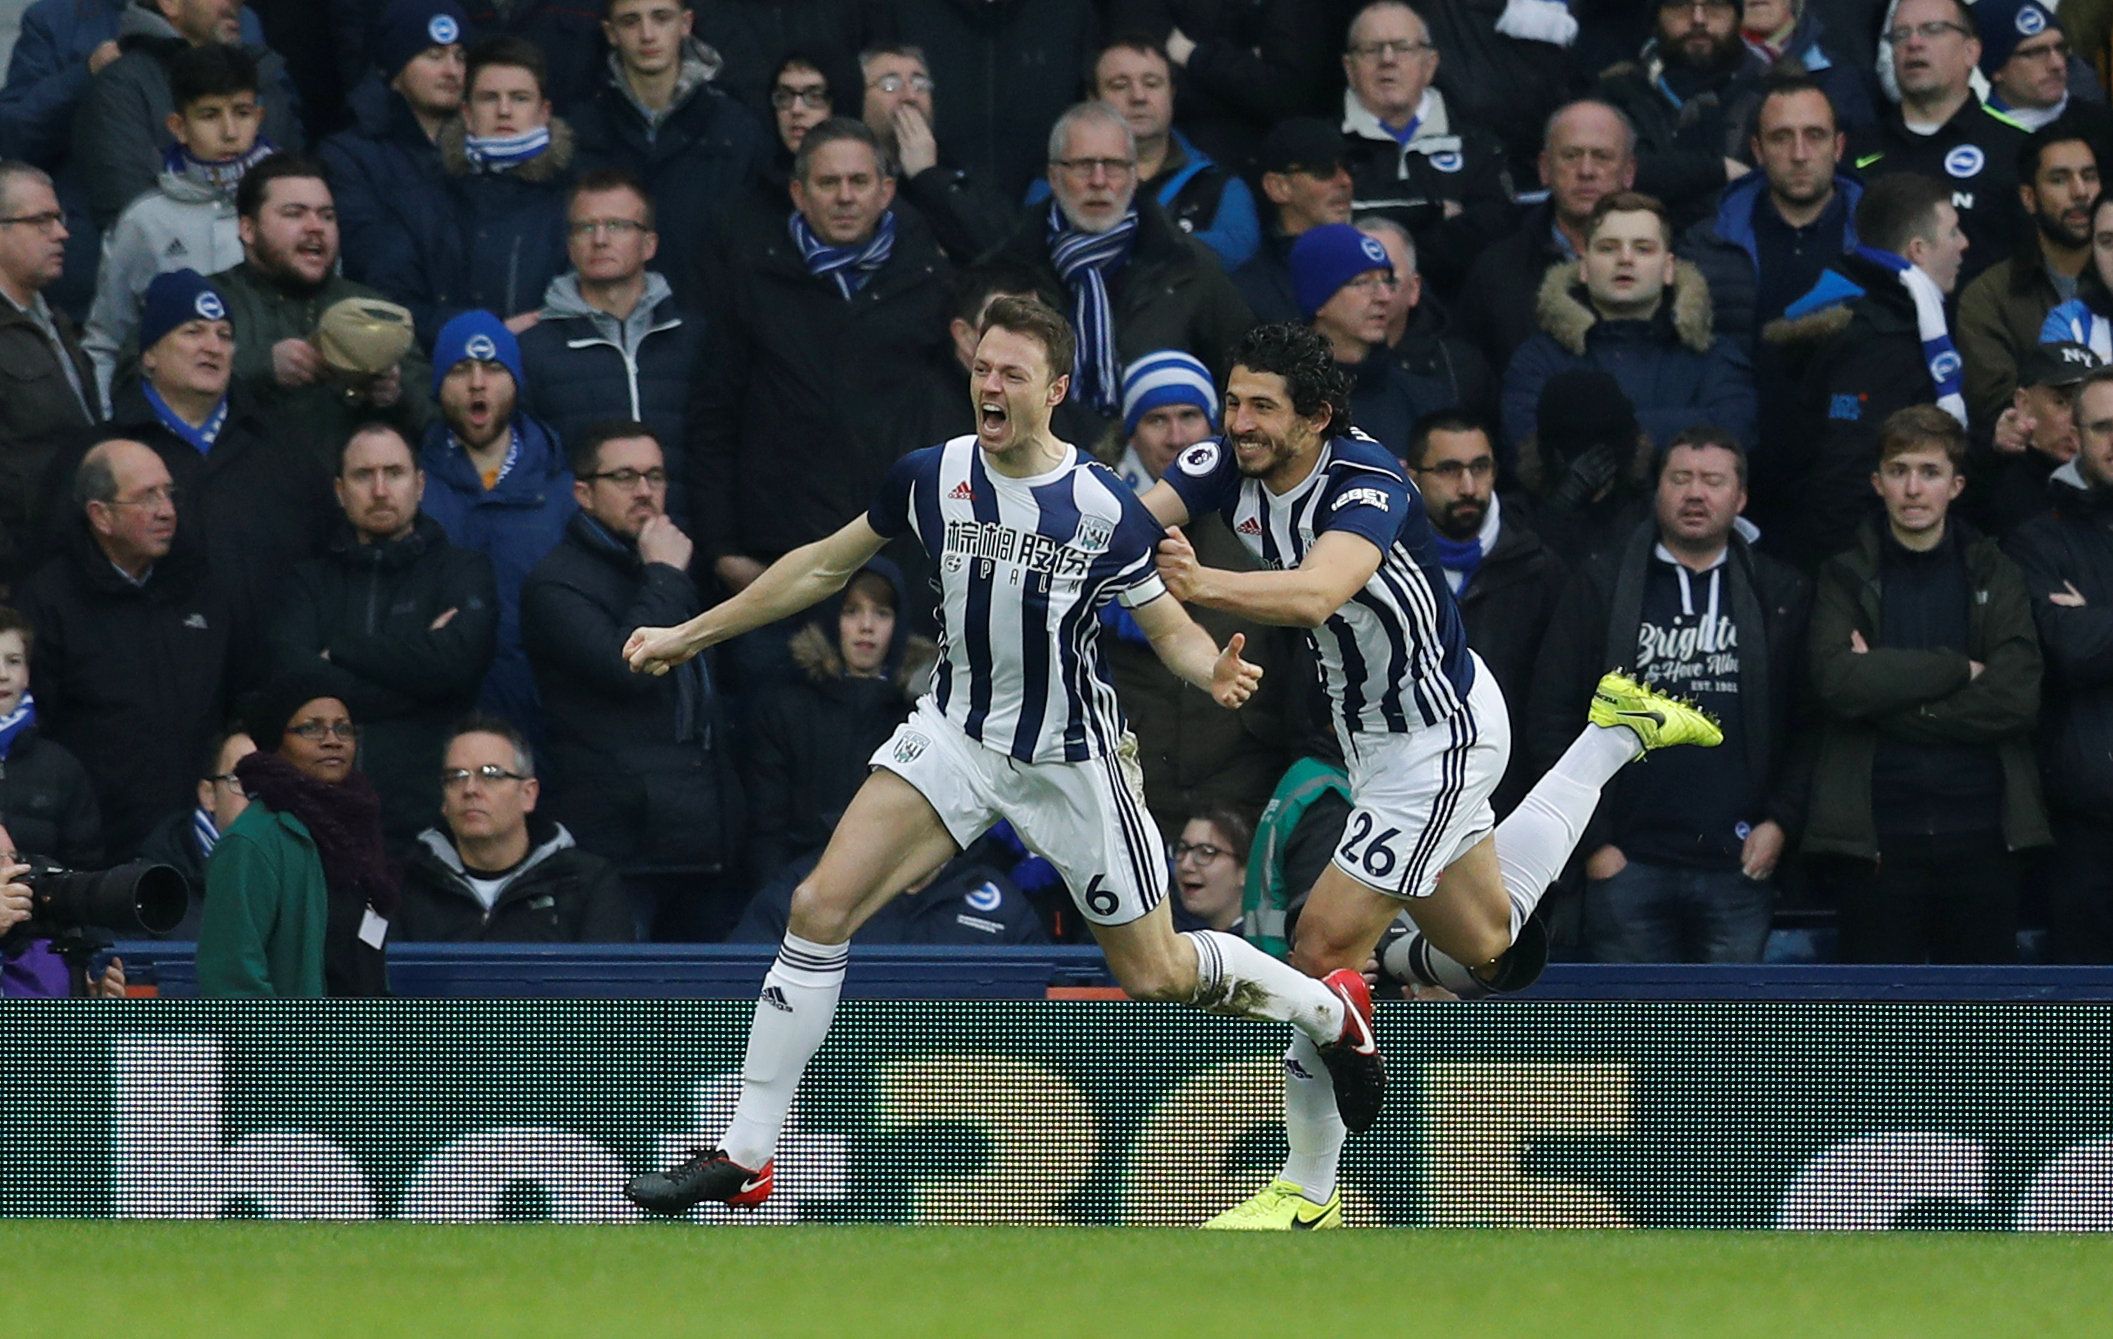 Soccer Football - Premier League - West Bromwich Albion vs Brighton &amp; Hove Albion - The Hawthorns, West Bromwich, Britain - January 13, 2018   West Bromwich Albion's Jonny Evans celebrates scoring their first goal with Ahmed Hegazi    REUTERS/Darren Staples    EDITORIAL USE ONLY. No use with unauthorized audio, video, data, fixture lists, club/league logos or 